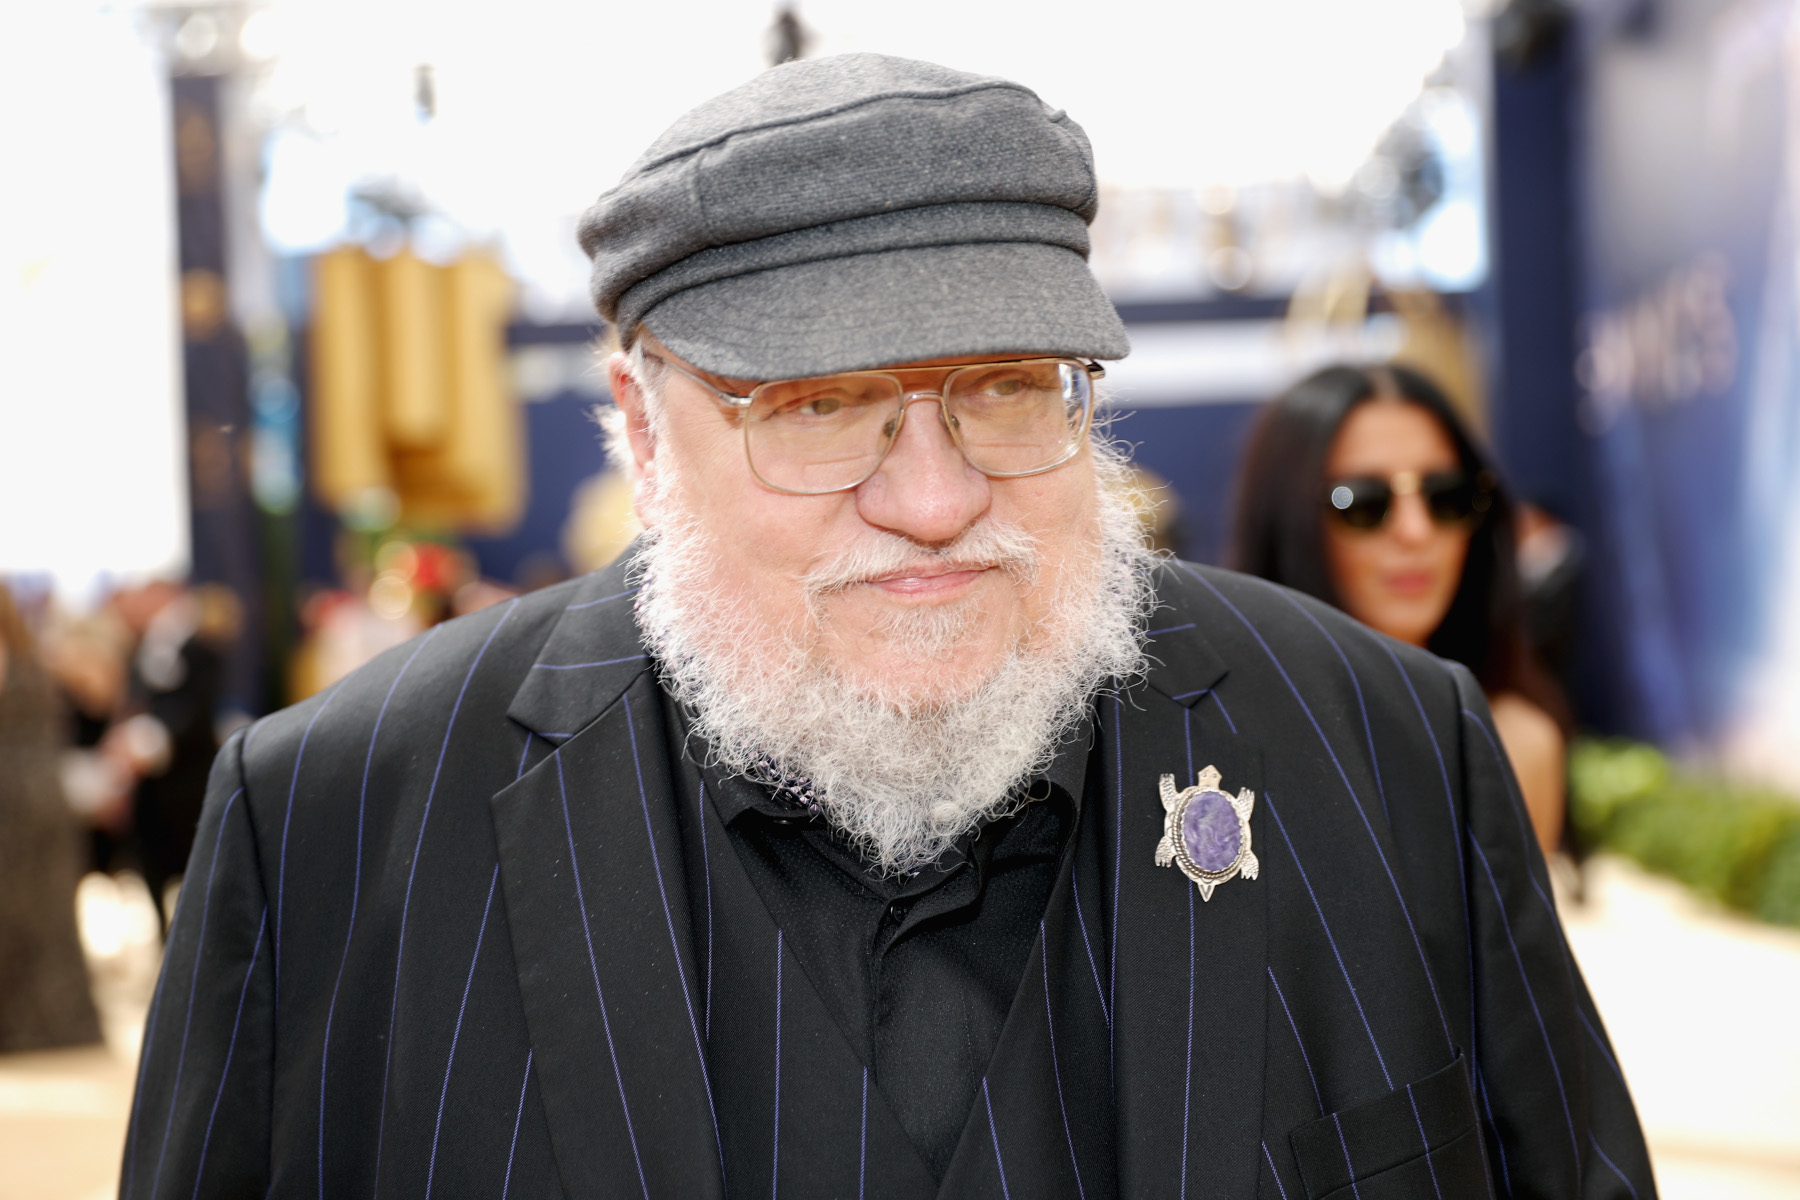 George R.R. Martin, who addressed the rivalry between 'House of the Dragon' and 'The Rings of Power.' He's wearing a grey hat, black suit, and pin on his left side.